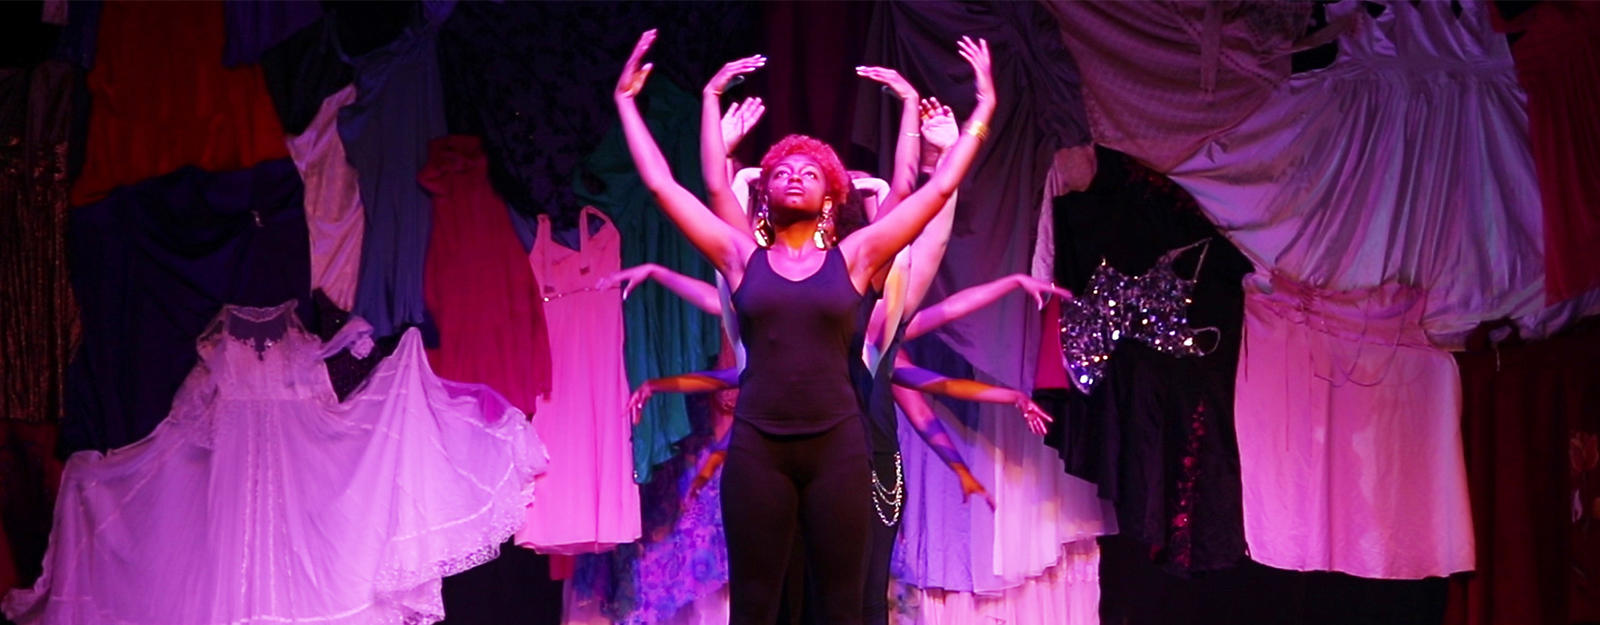 Students doing an interpretive dance during a performance.